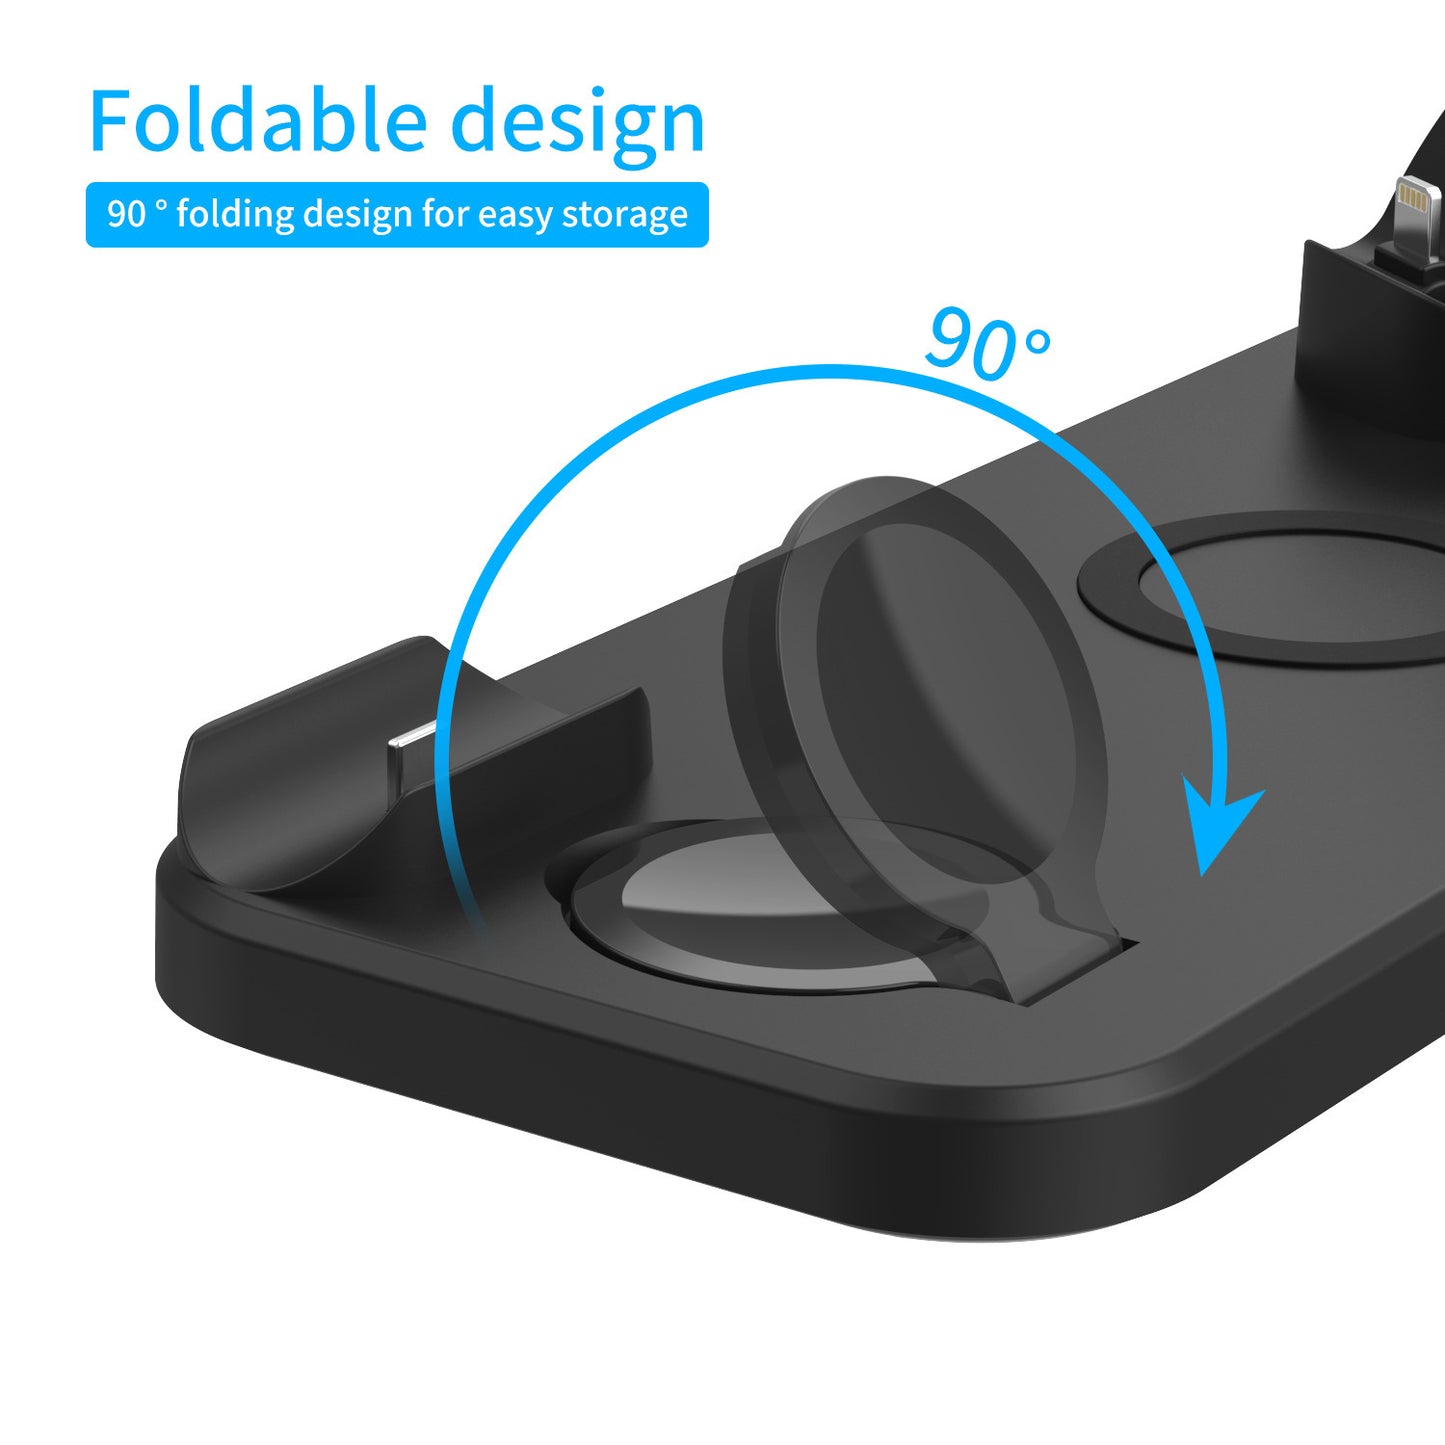 Compatible with Apple , Multifunctional wireless charger